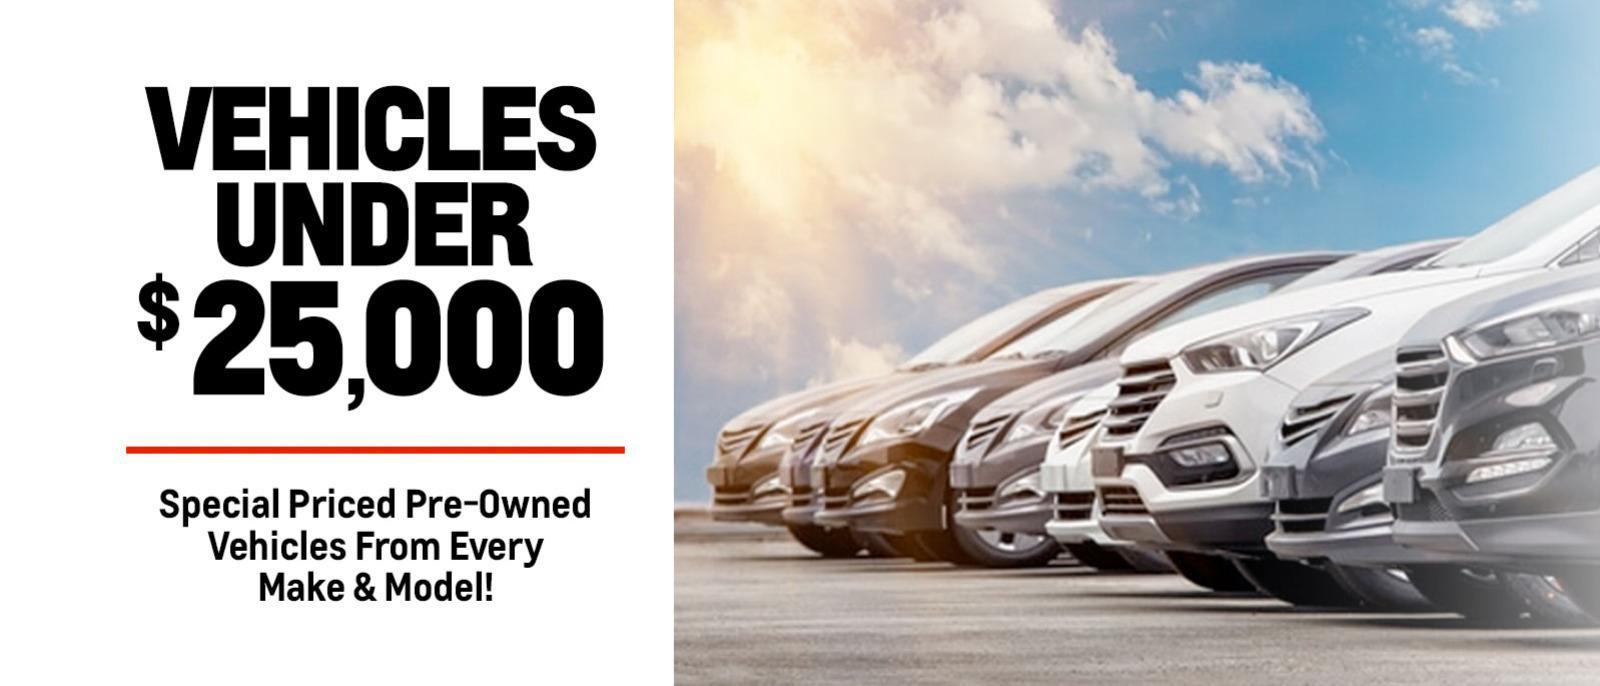 Pre-Owned Specials at McGee Chevy